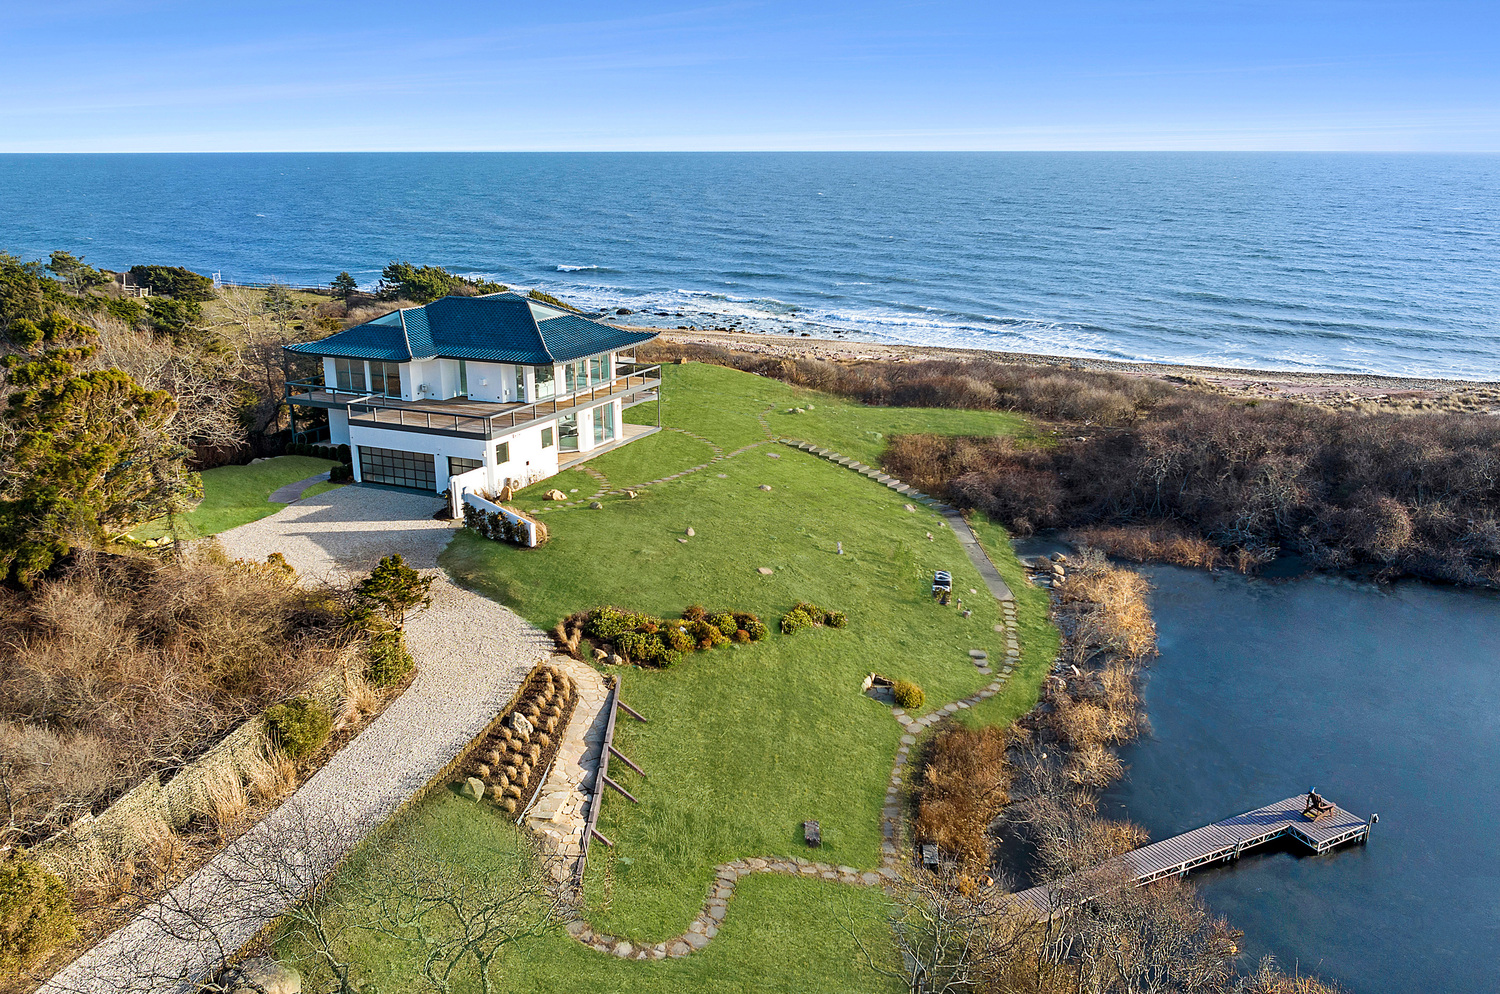 In Montauk, 42 Old Montauk Highway recently sold for $18.5 million. RISE MEDIA